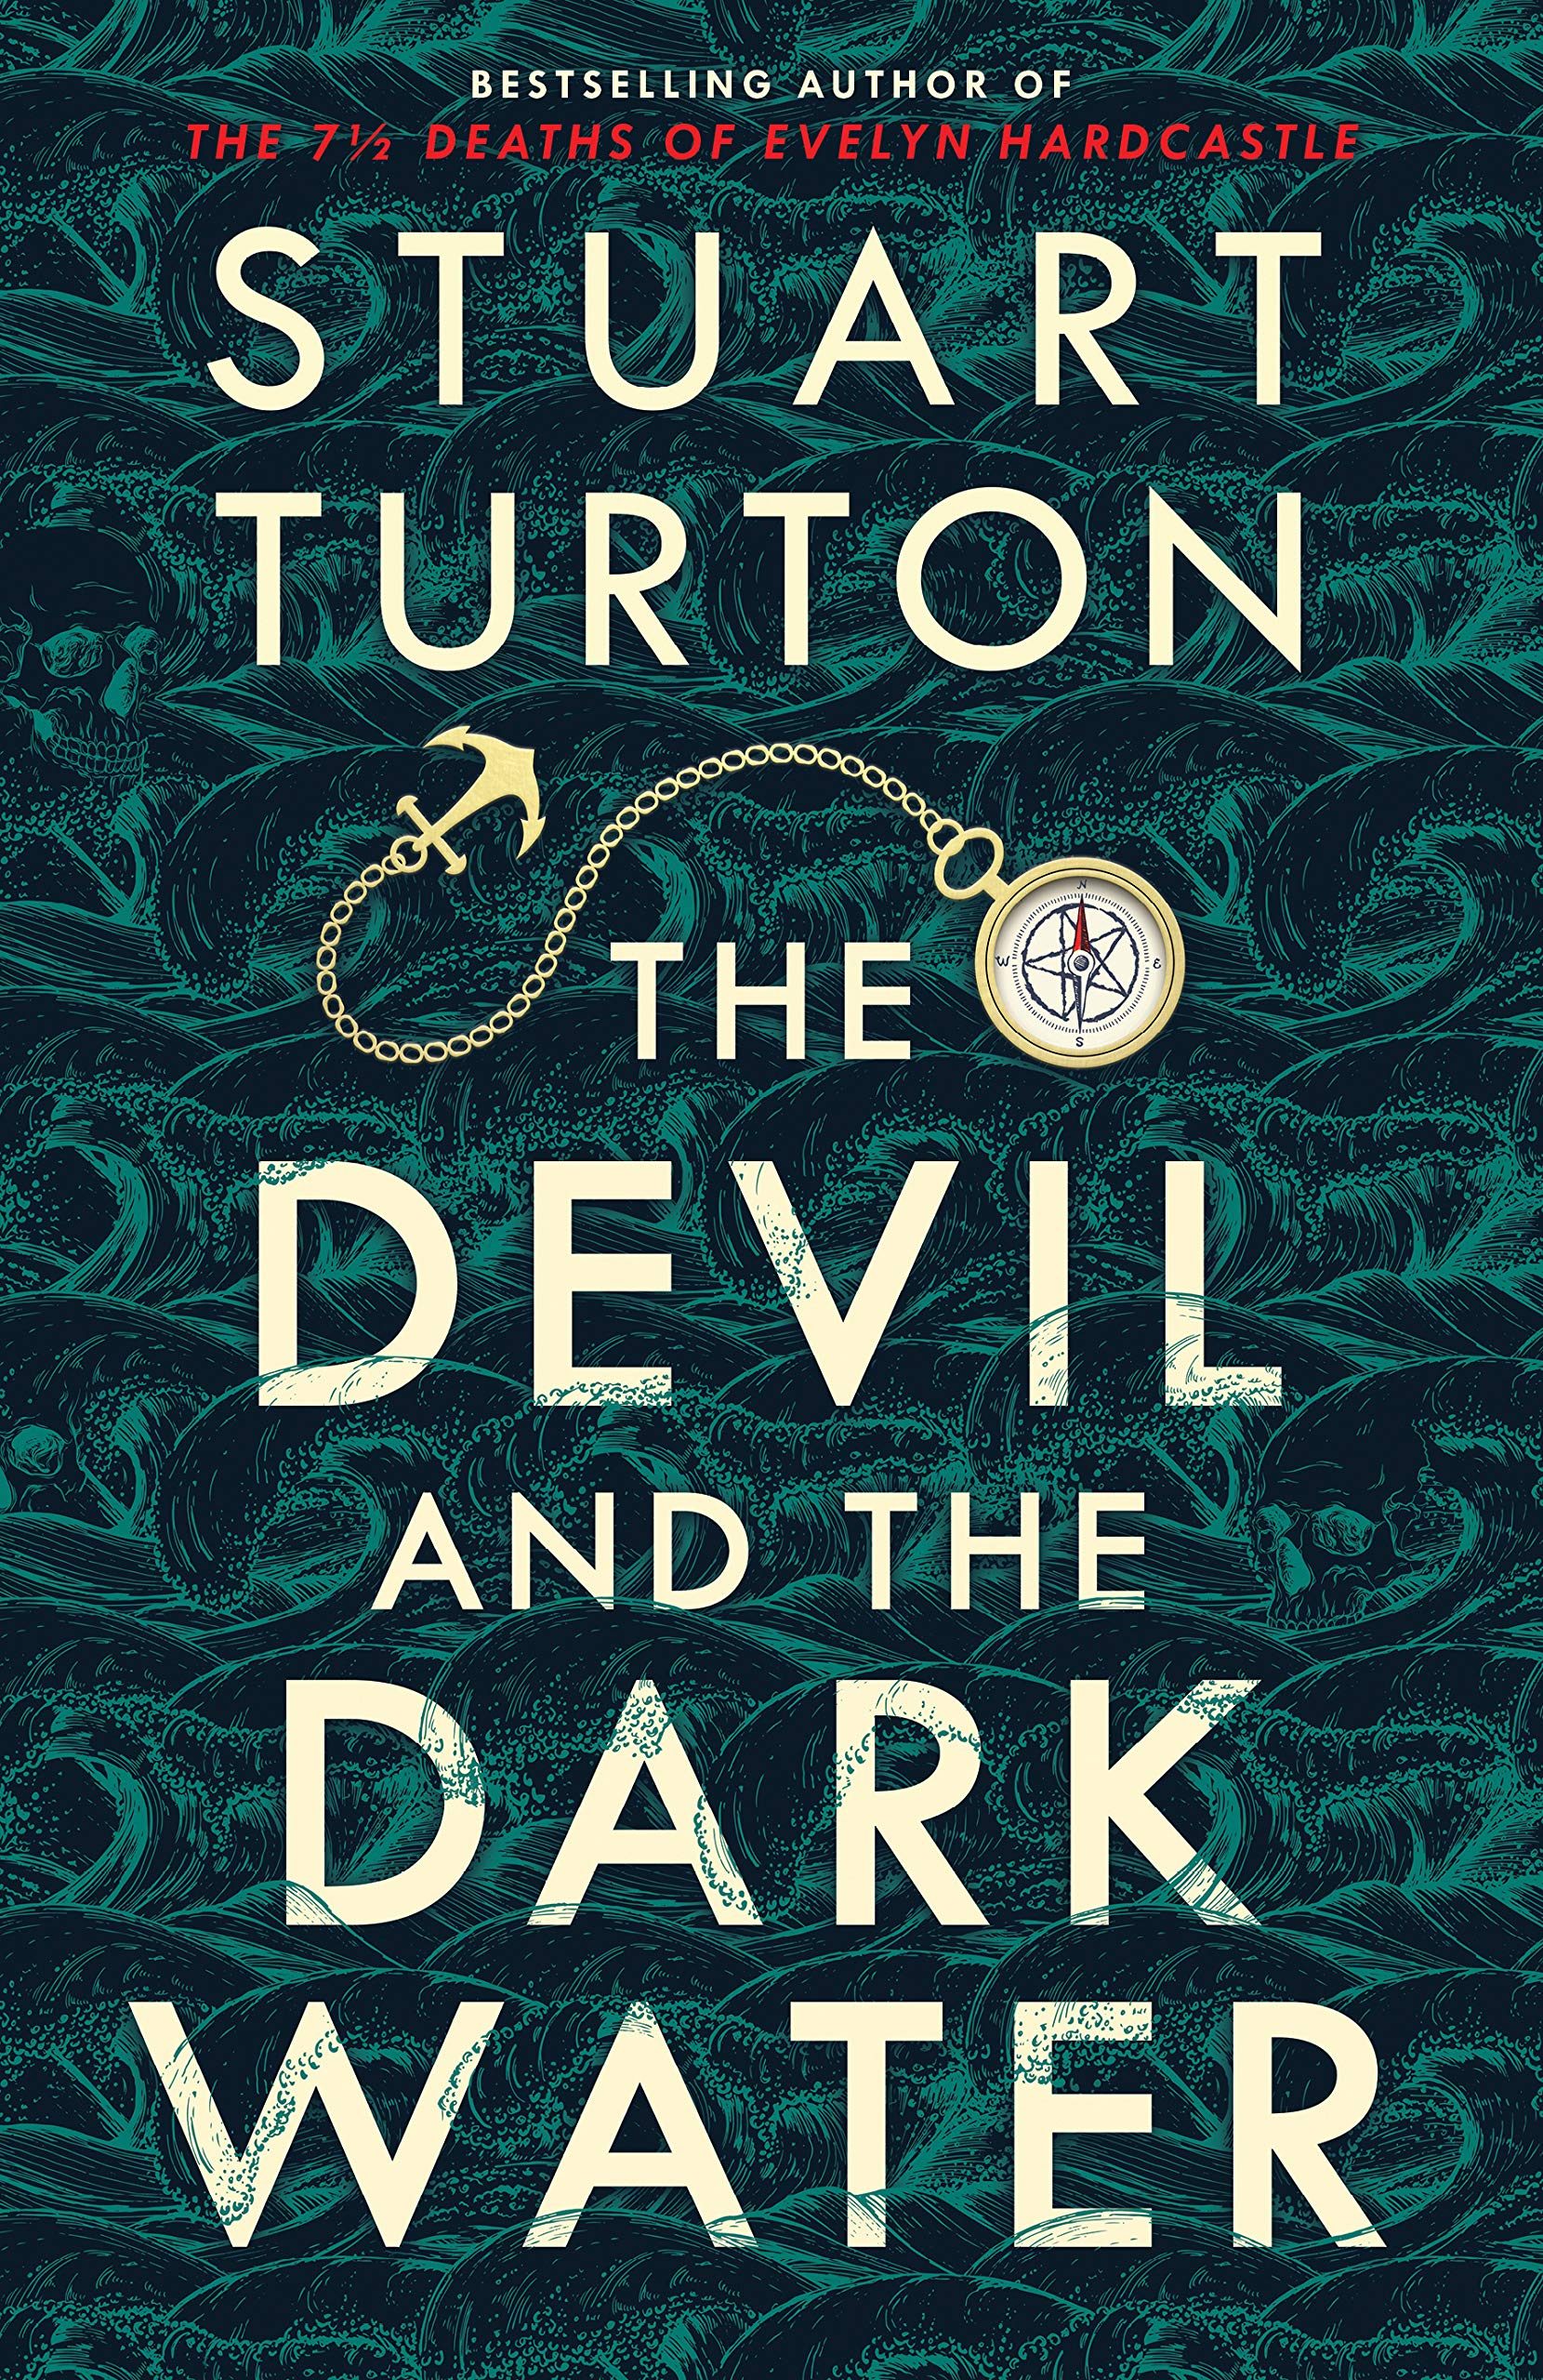 When Does The Devil And The Dark Water By Stuart Turton Release? 2020 Mystery Releases